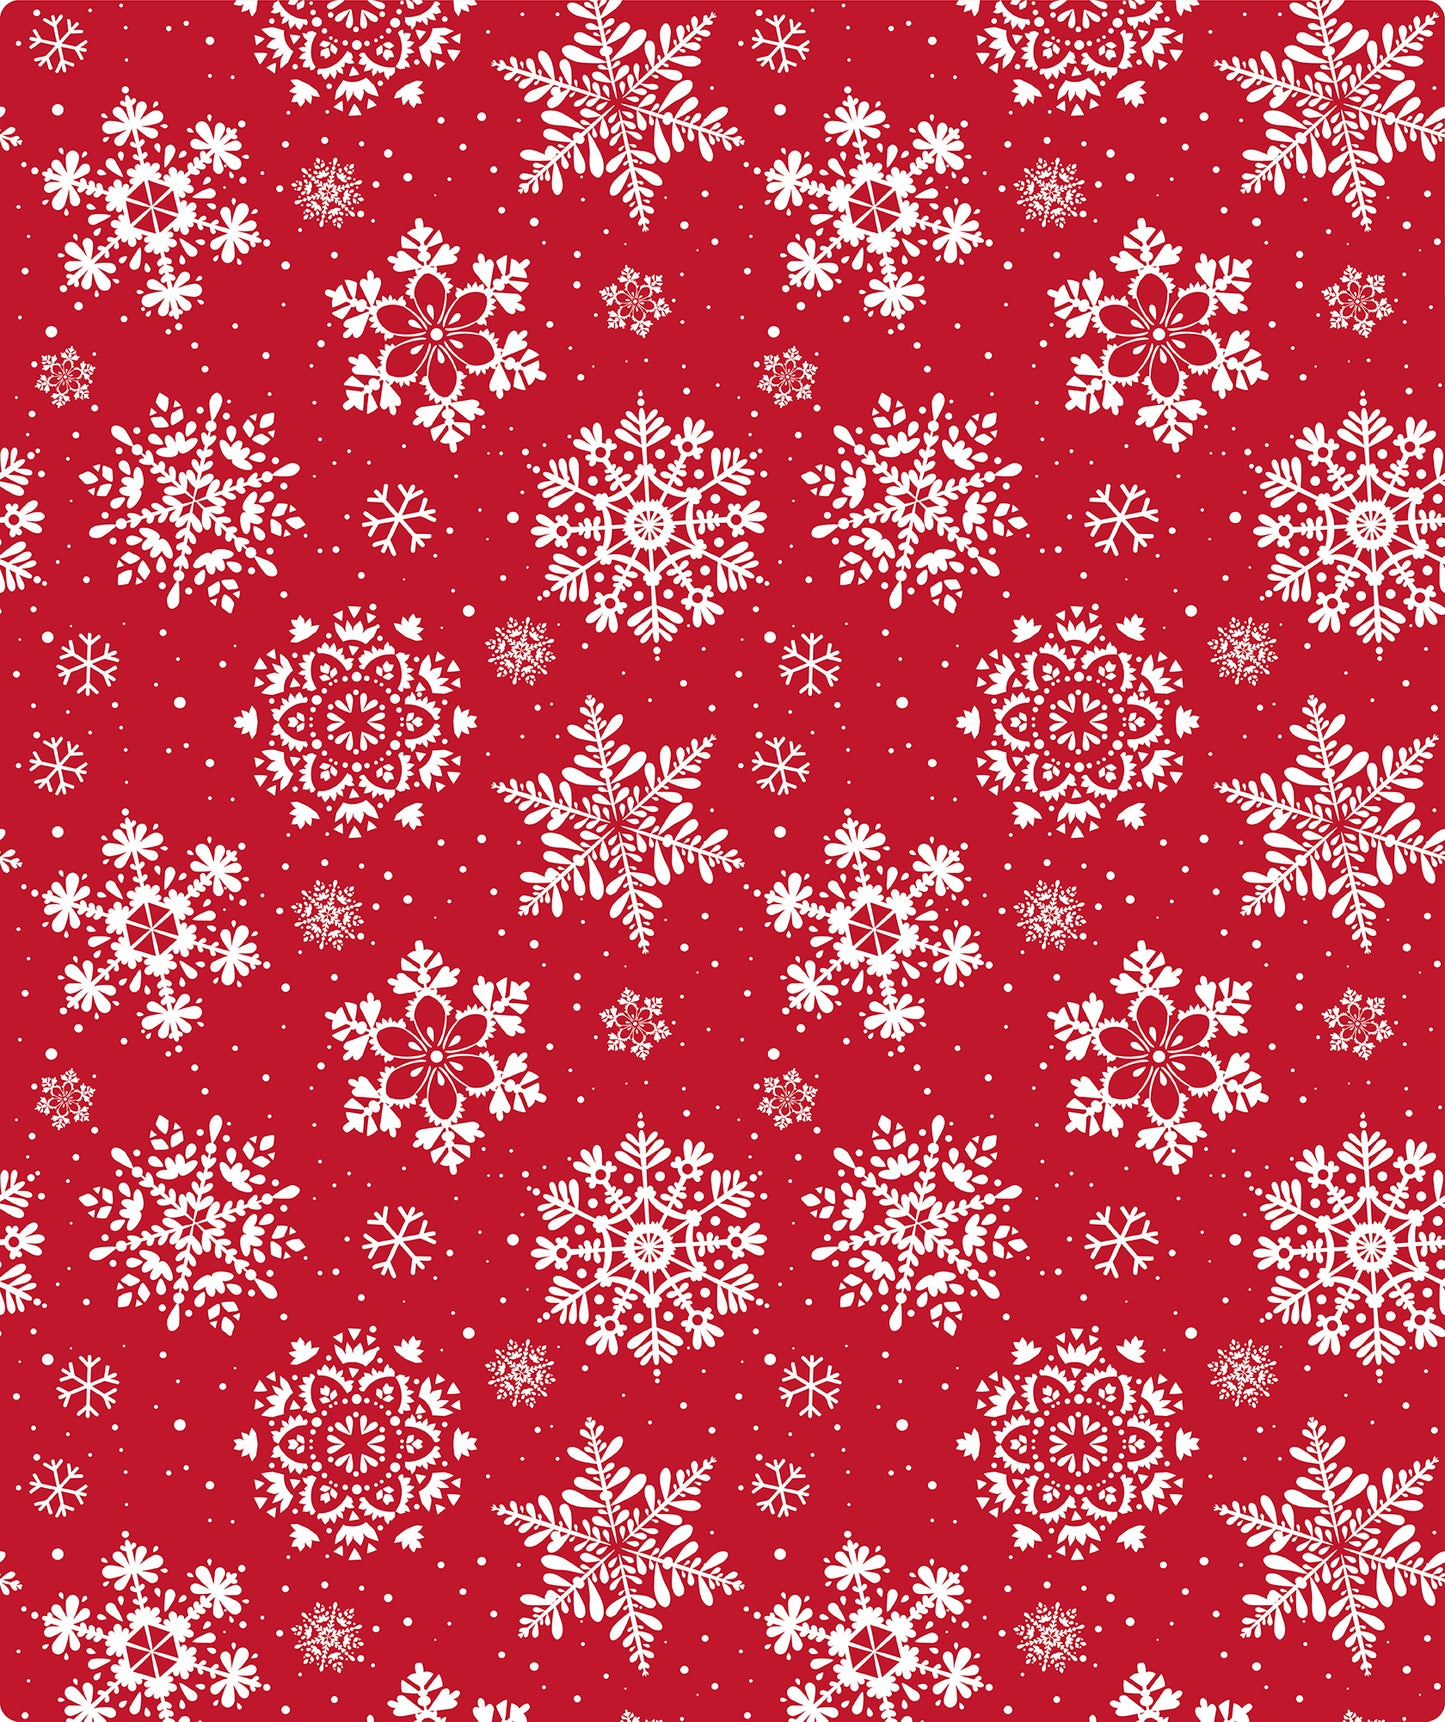 Red ＆ White Red Snowflake Foil Wrapping Paper Roll Wholesale Wrapholic